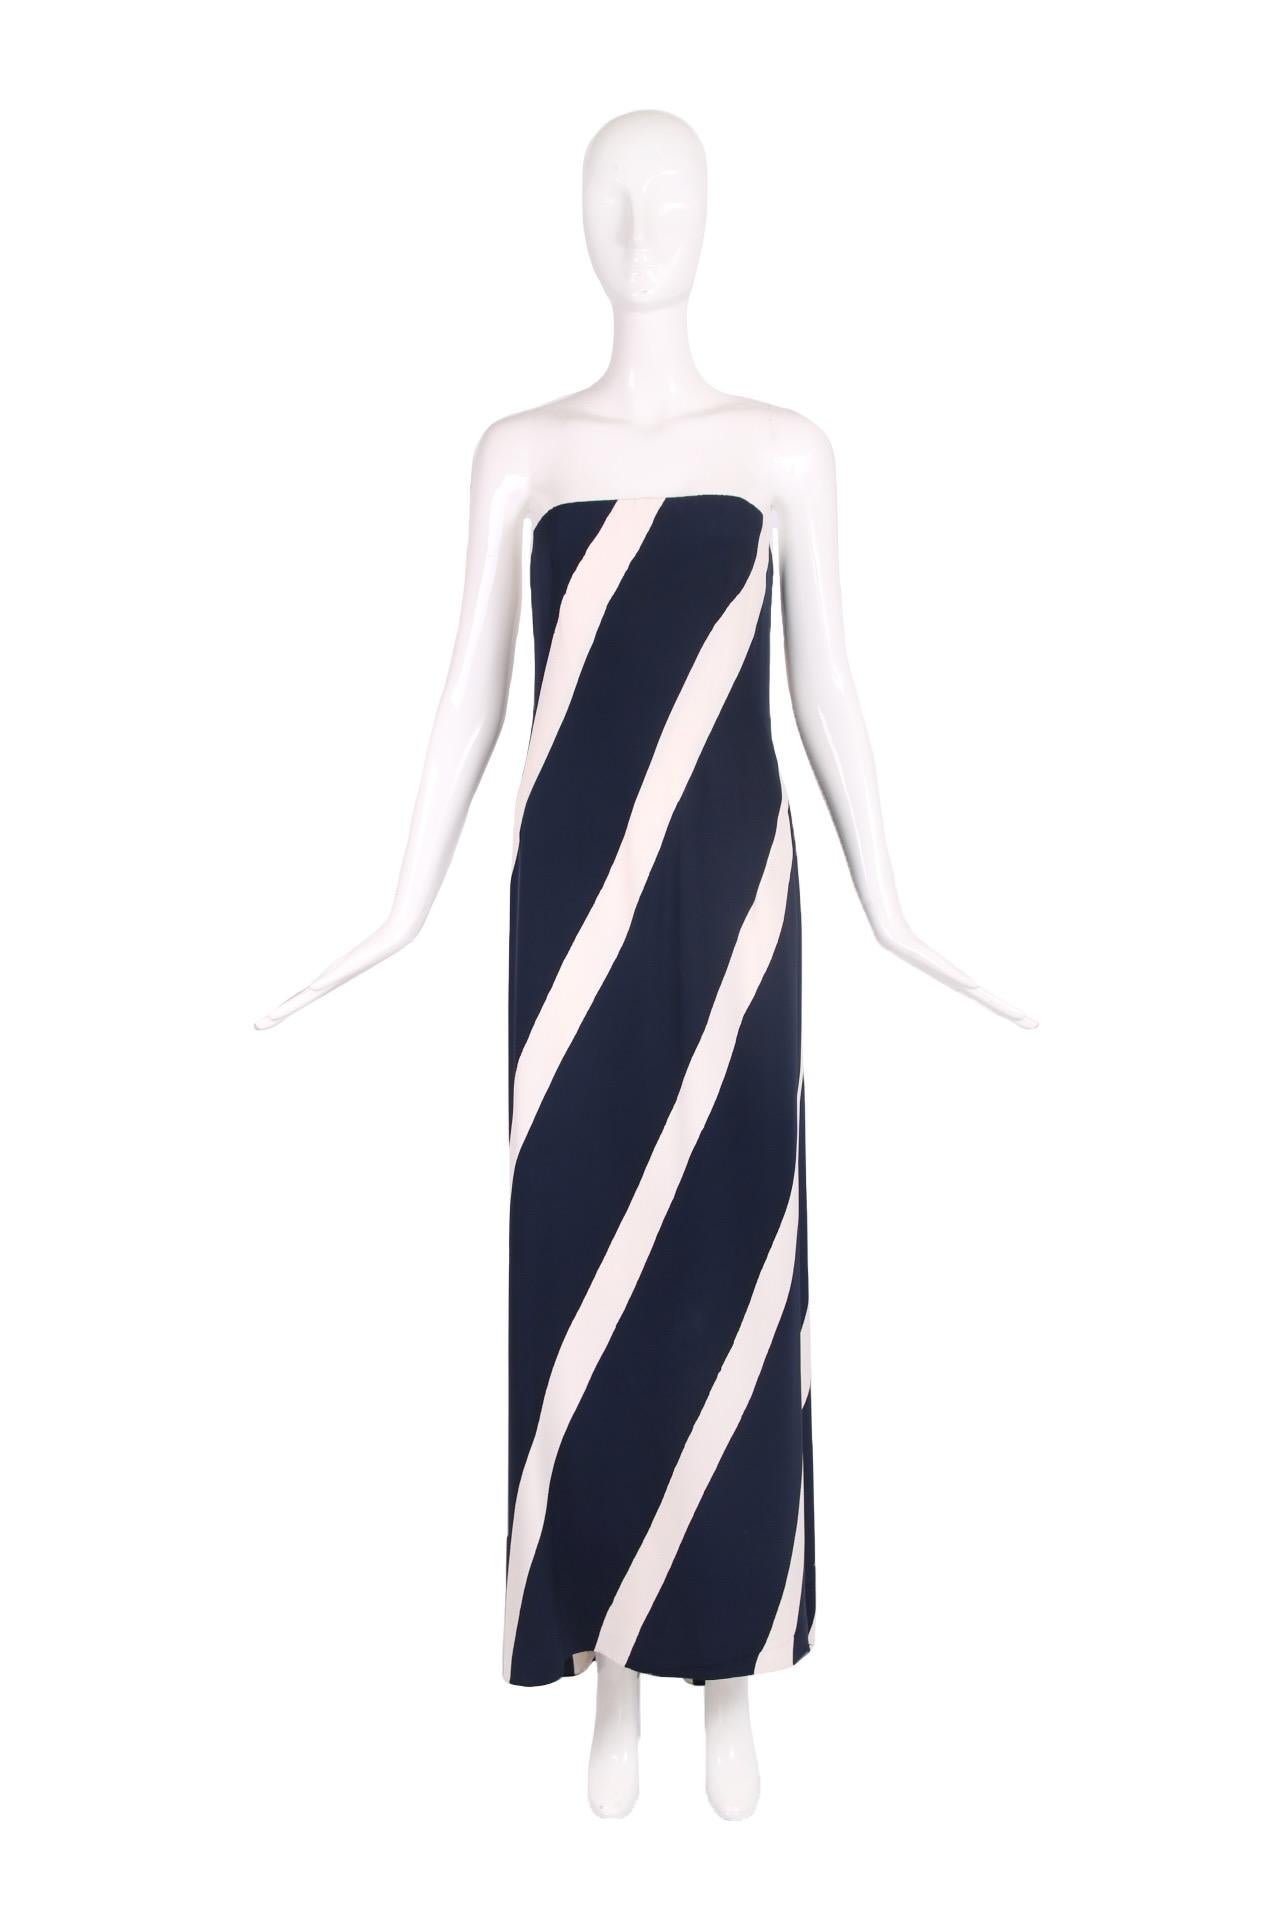 1992 S/S Yves Saint Laurent haute couture no.67074 silk strapless evening gown with vertical/diagonal navy and white stripes and a mini-train at the back hem. Though deceptively simple-looking from the exterior, the interior and construction is